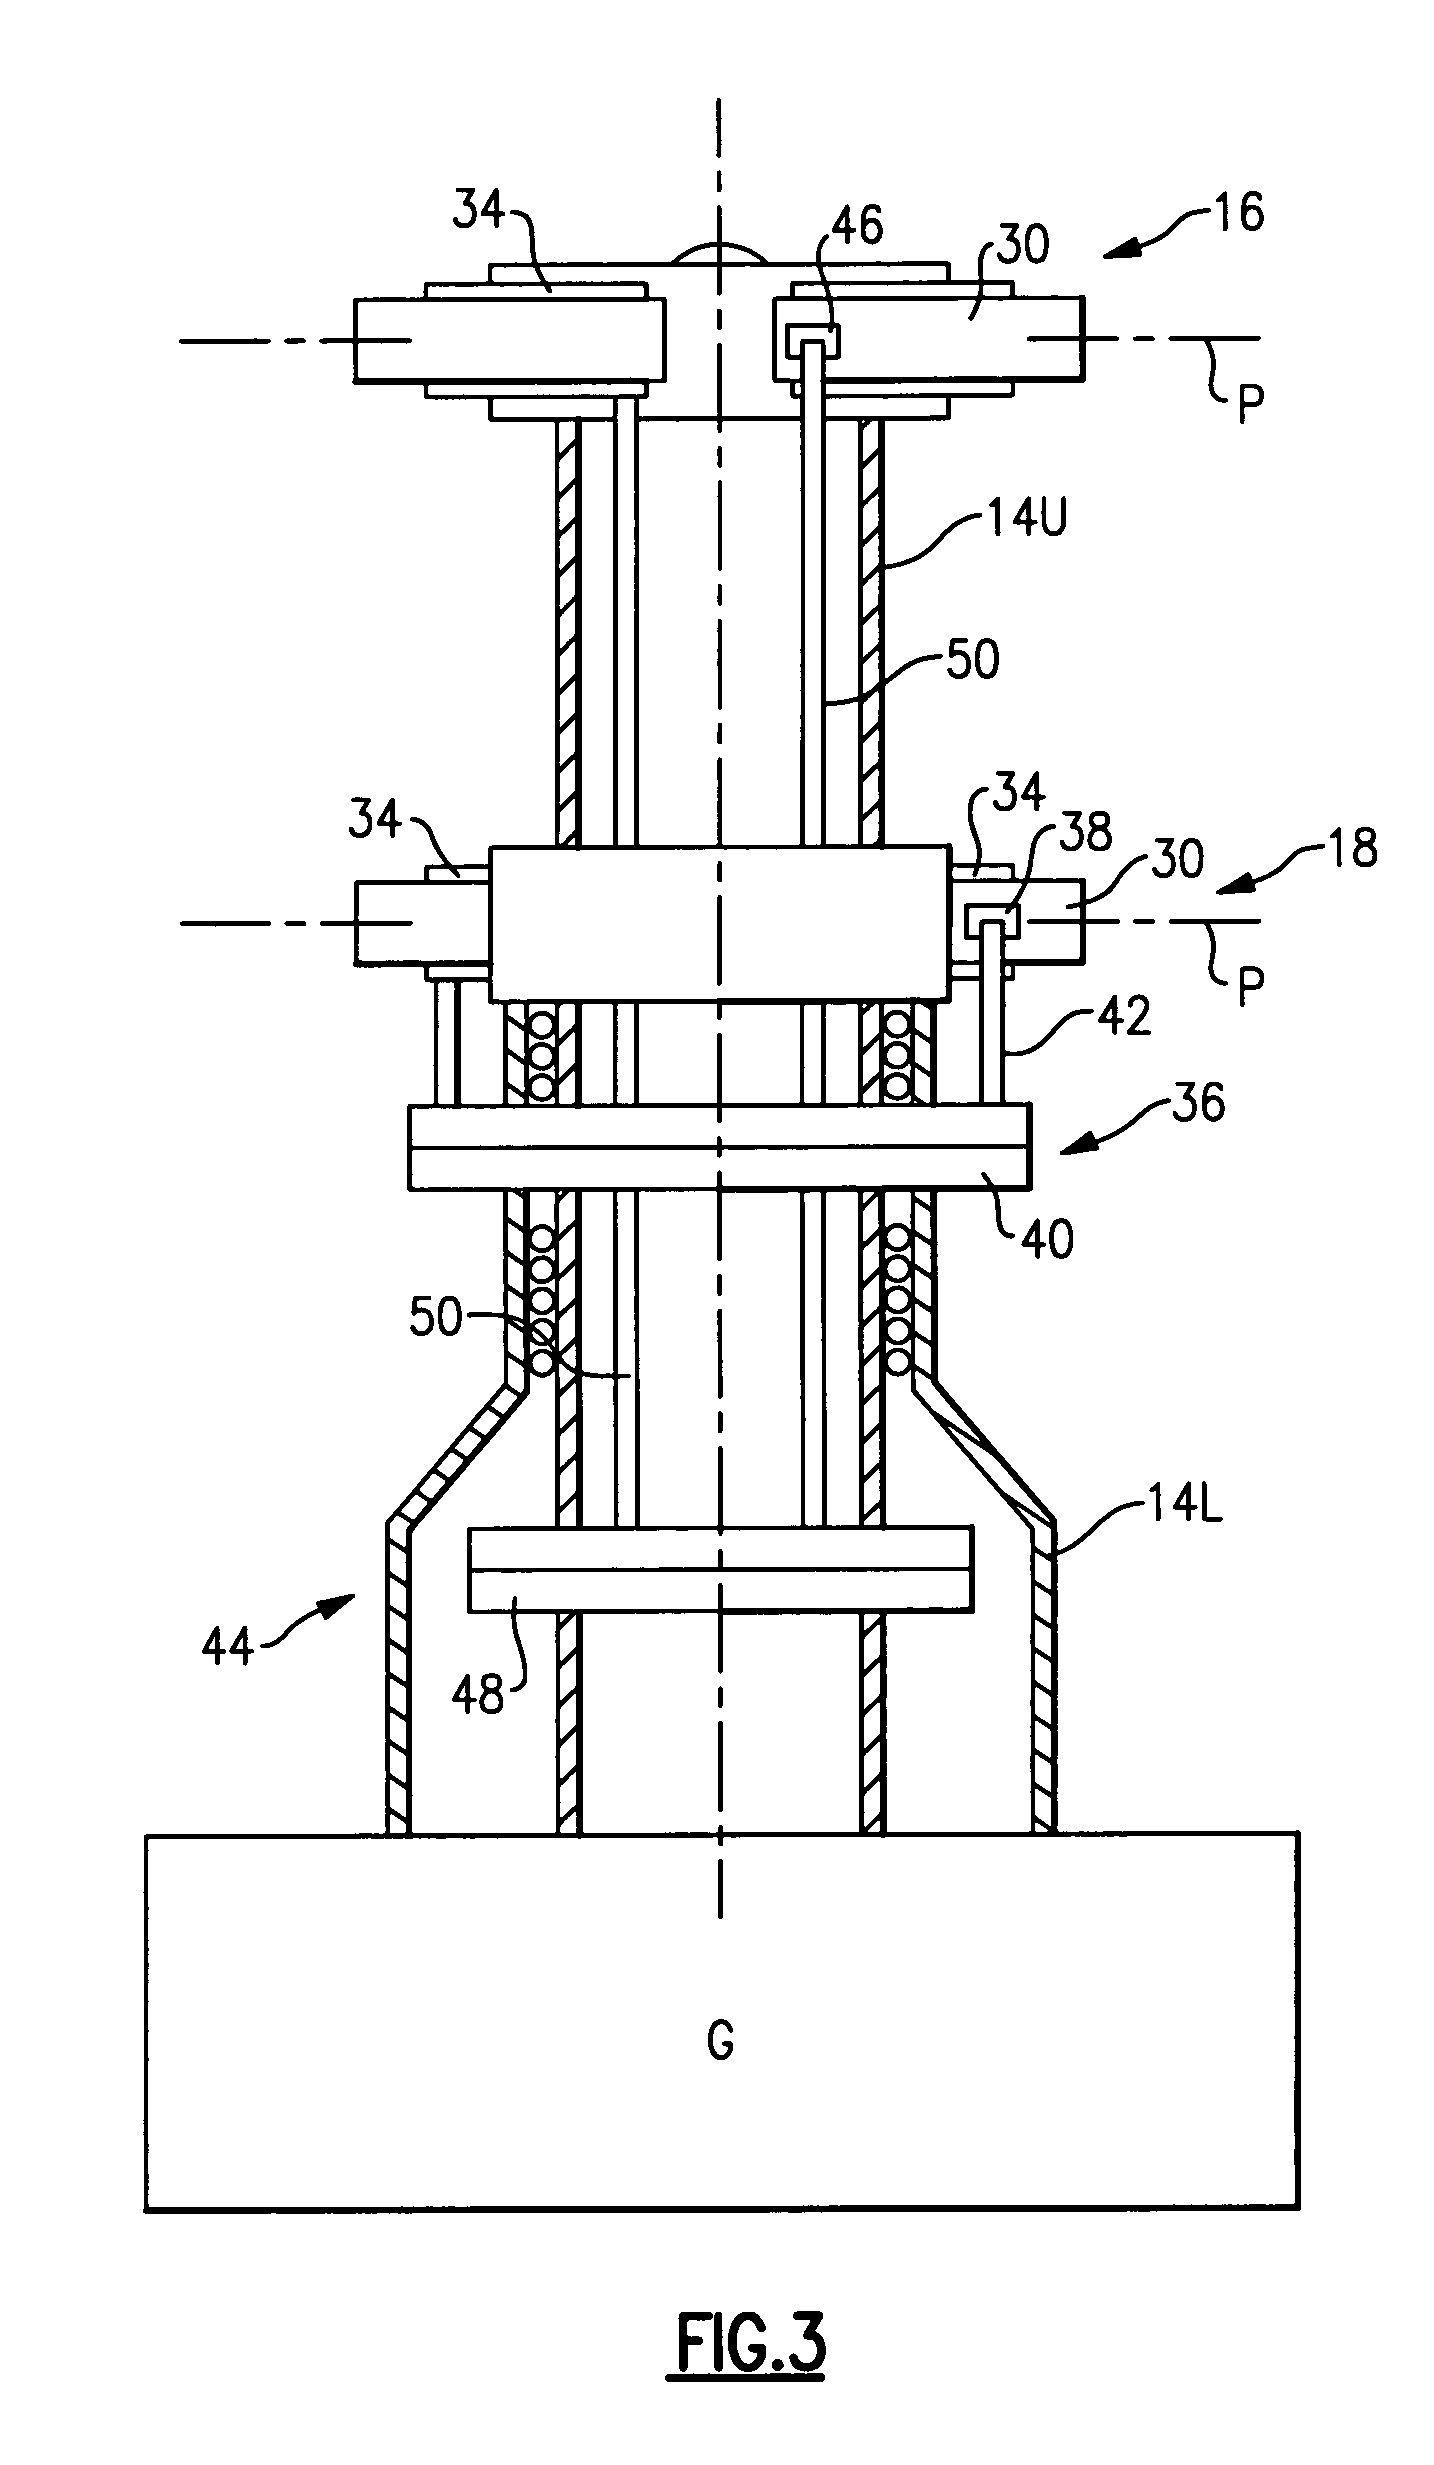 Dual higher harmonic control (HHC) for a counter-rotating, coaxial rotor system